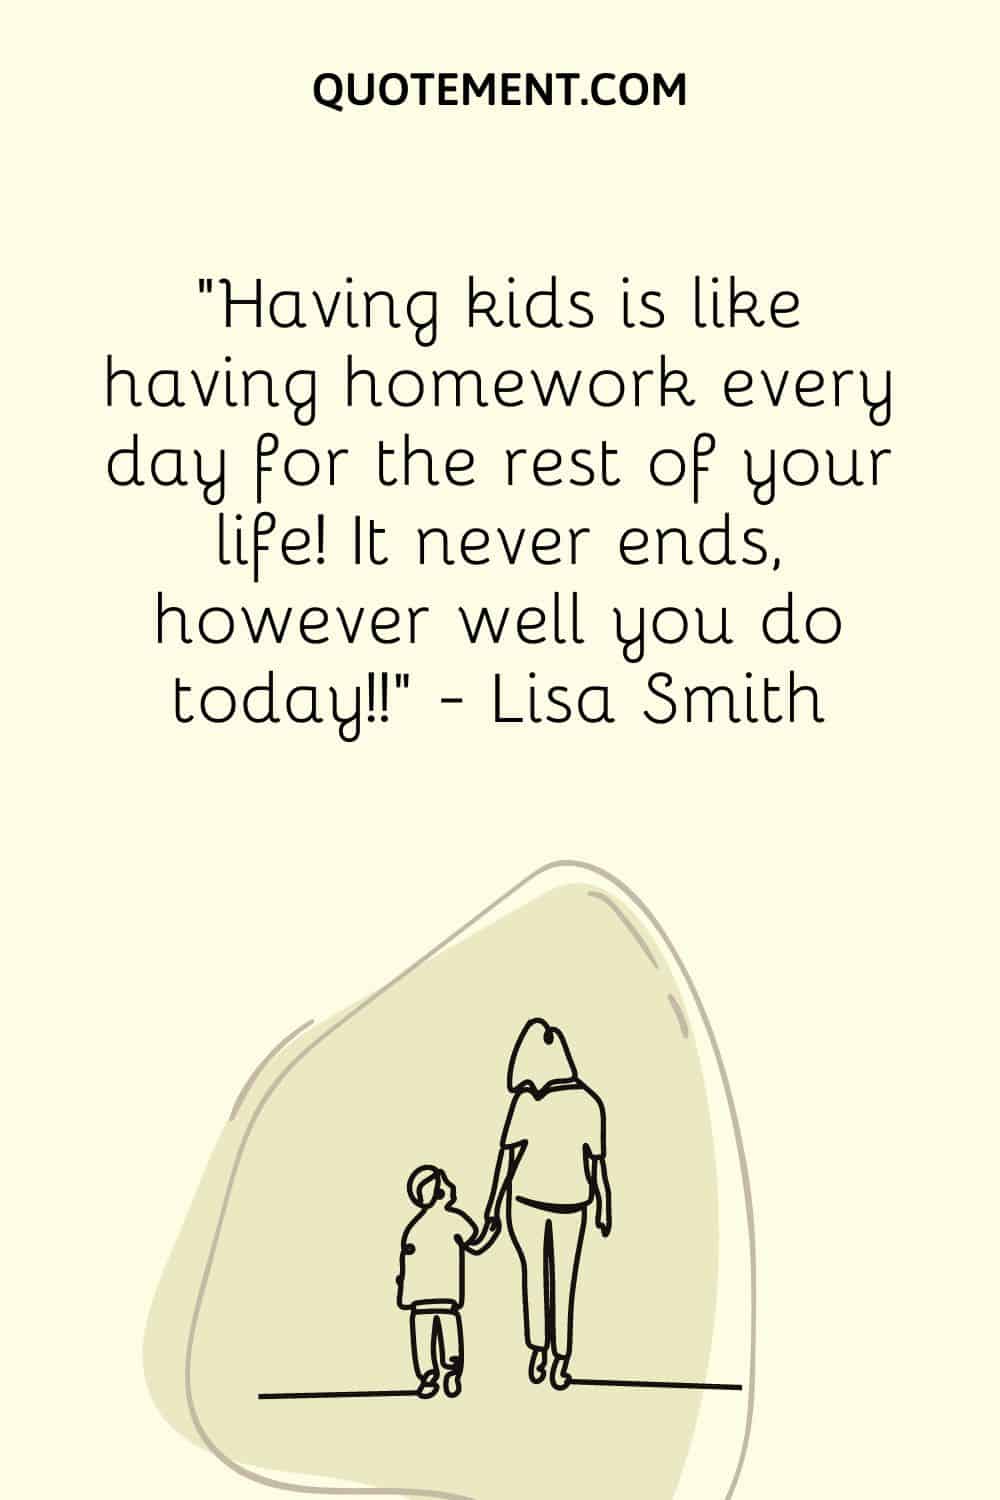 Having kids is like having homework every day for the rest of your life